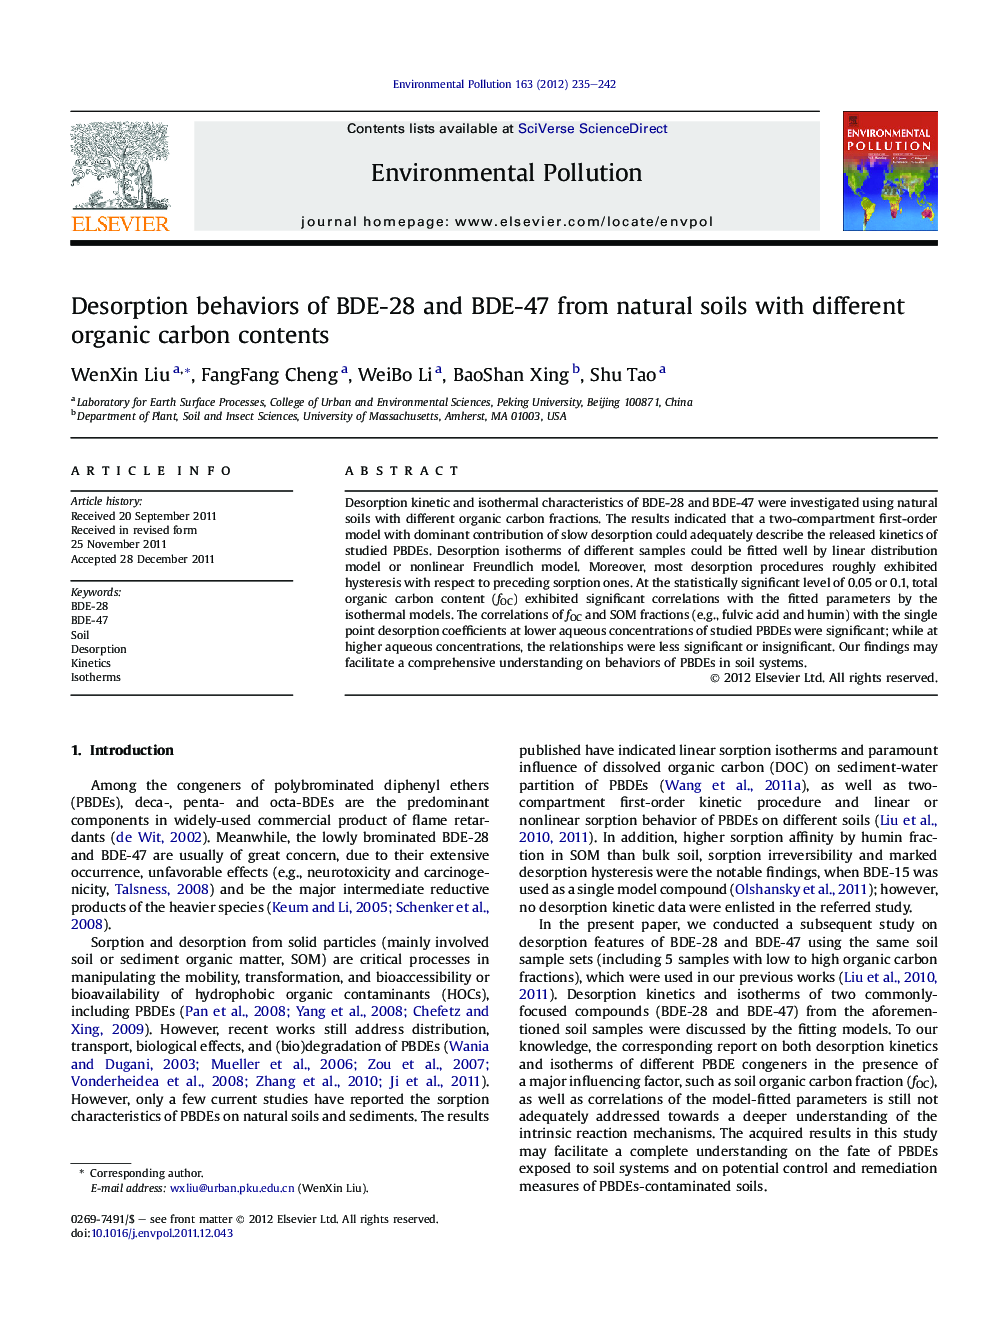 Desorption behaviors of BDE-28 and BDE-47 from natural soils with different organic carbon contents